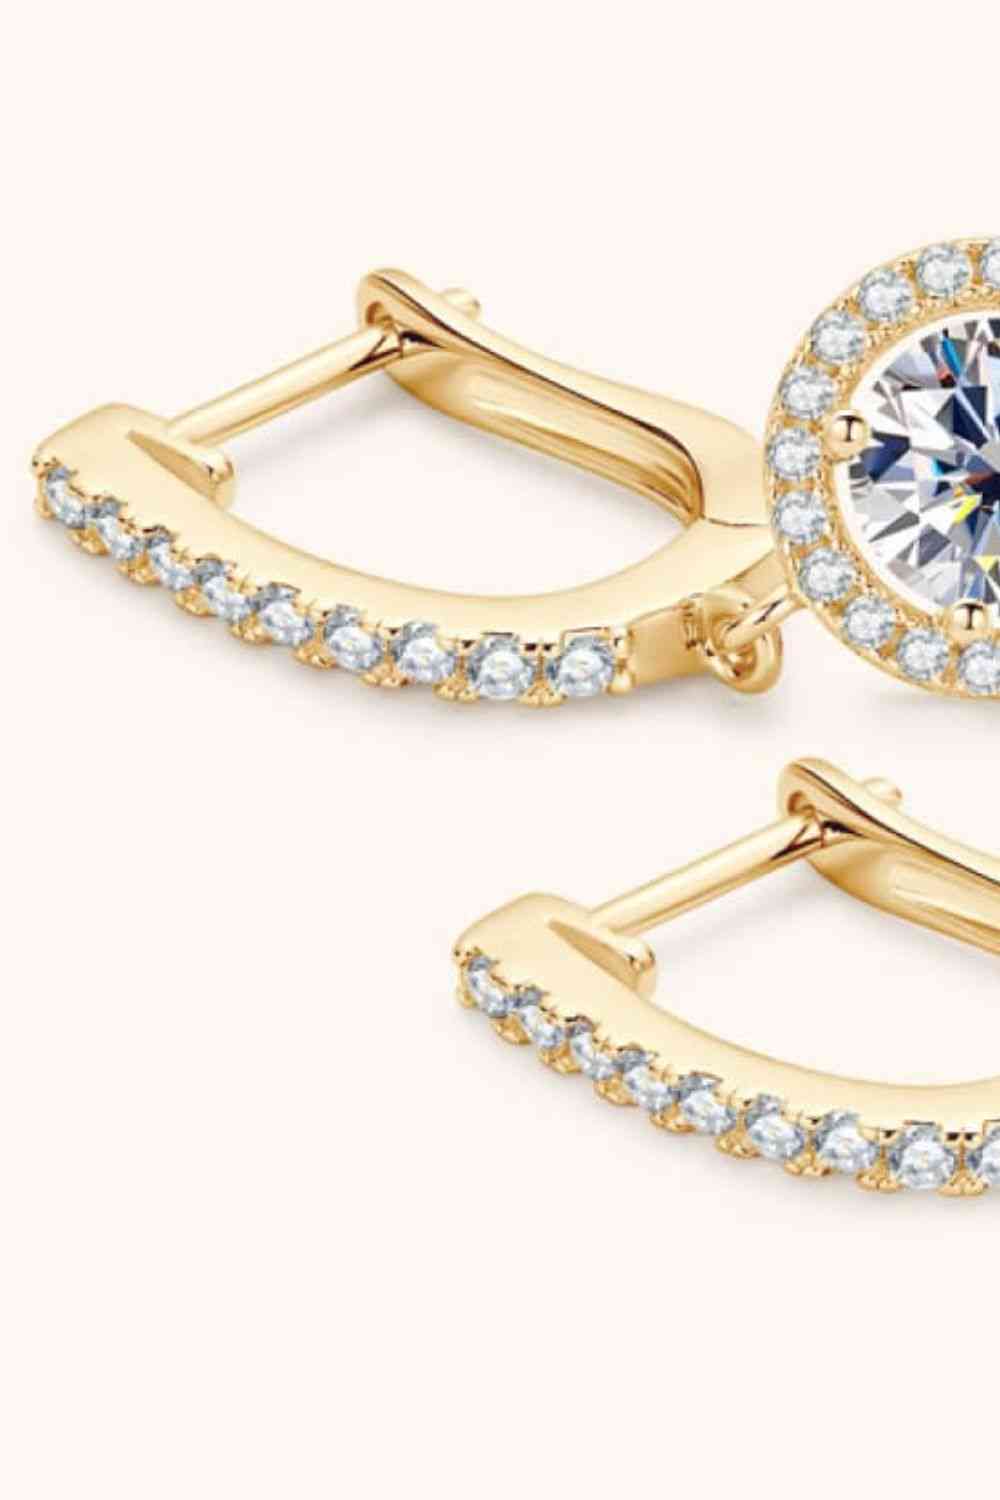 a pair of gold earrings with a white diamond